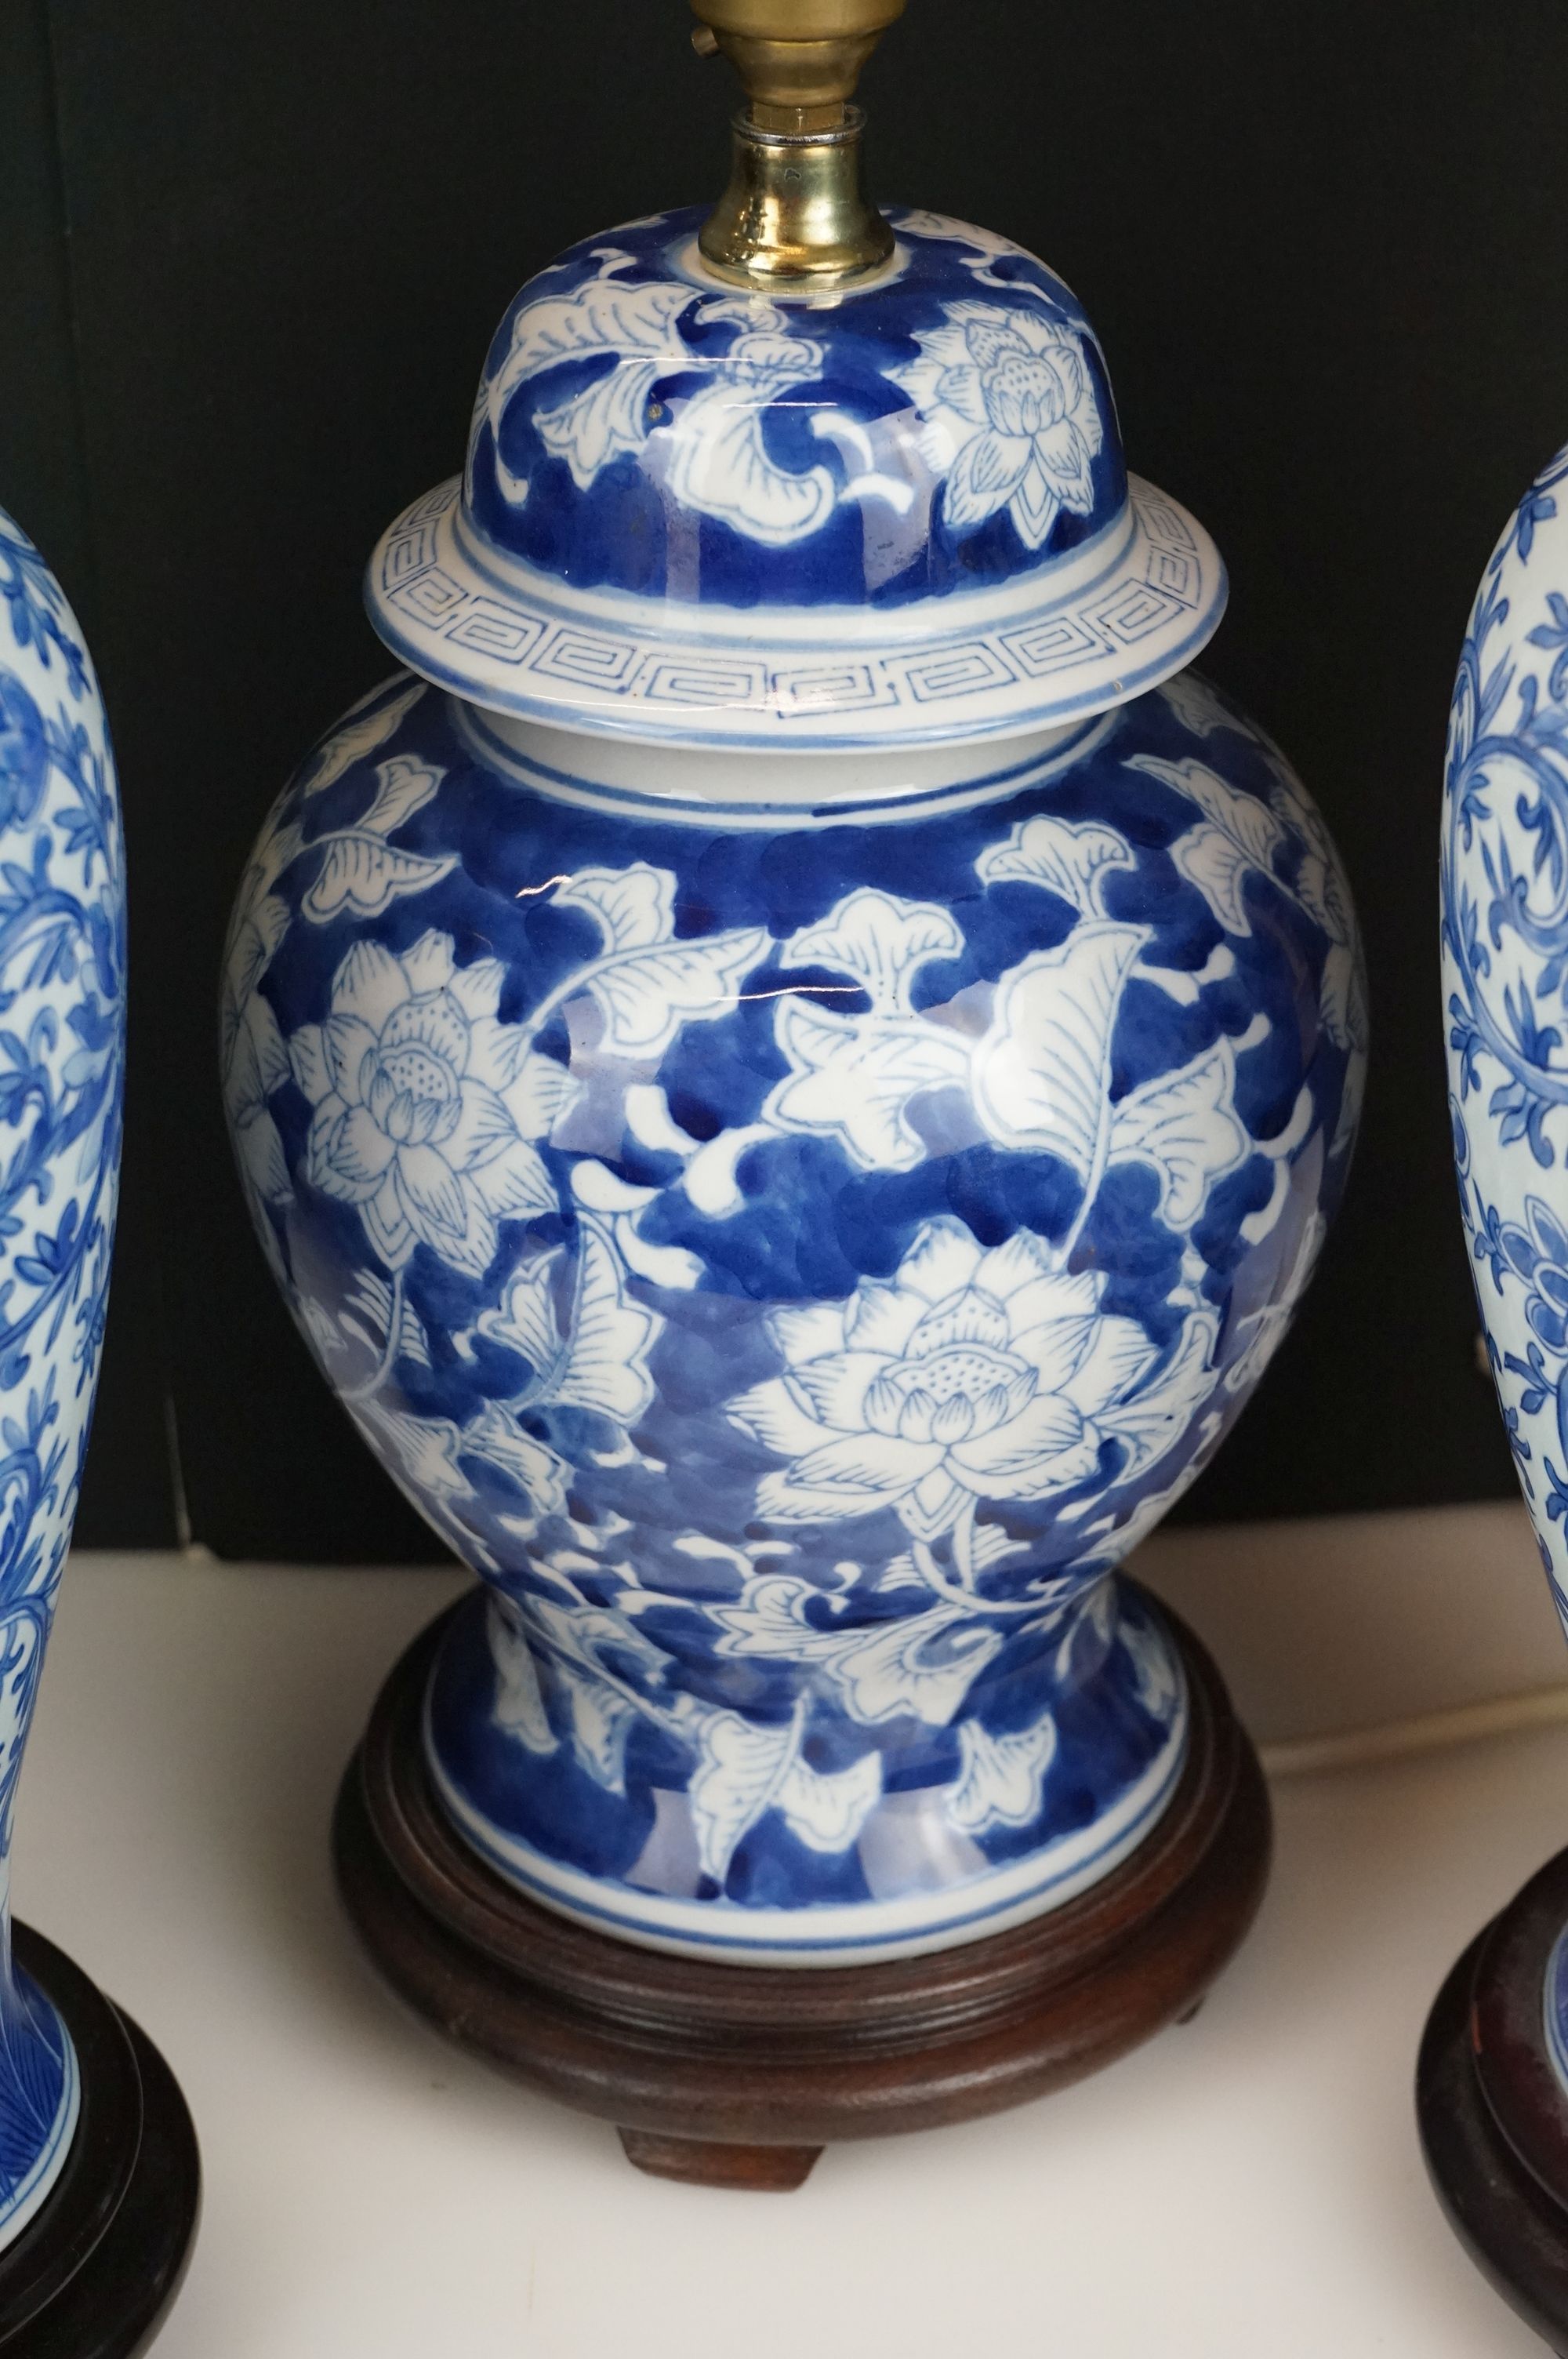 Pair of Blue and White Ceramic Table Lamps in the form of Lidded Ginger Jars on Wooden Stands, - Image 2 of 4